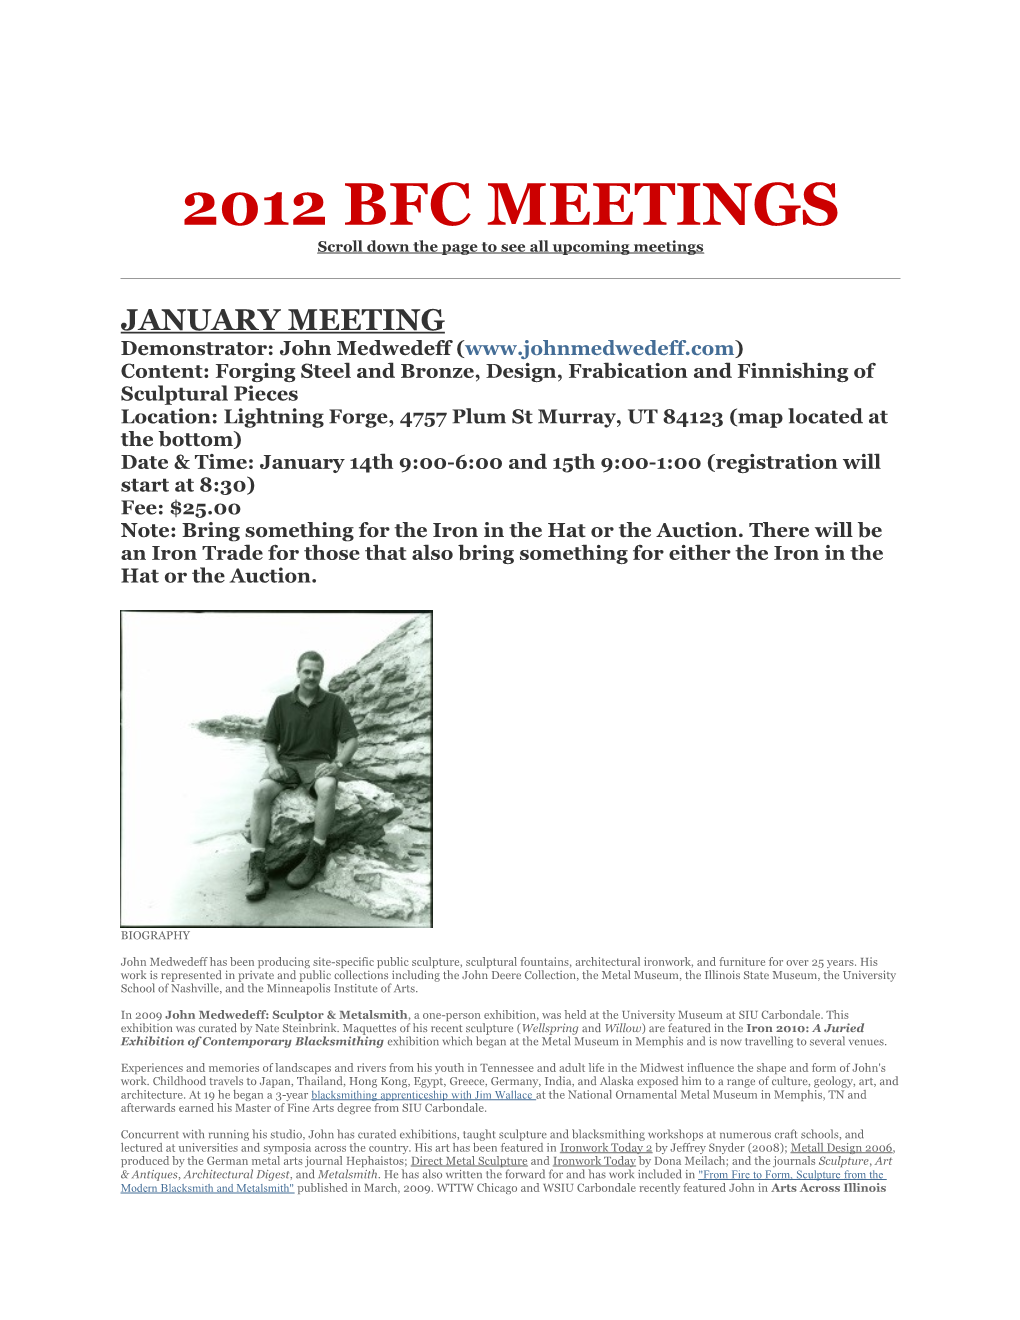 2012 BFC MEETINGS Scroll Down the Page to See All Upcoming Meetings